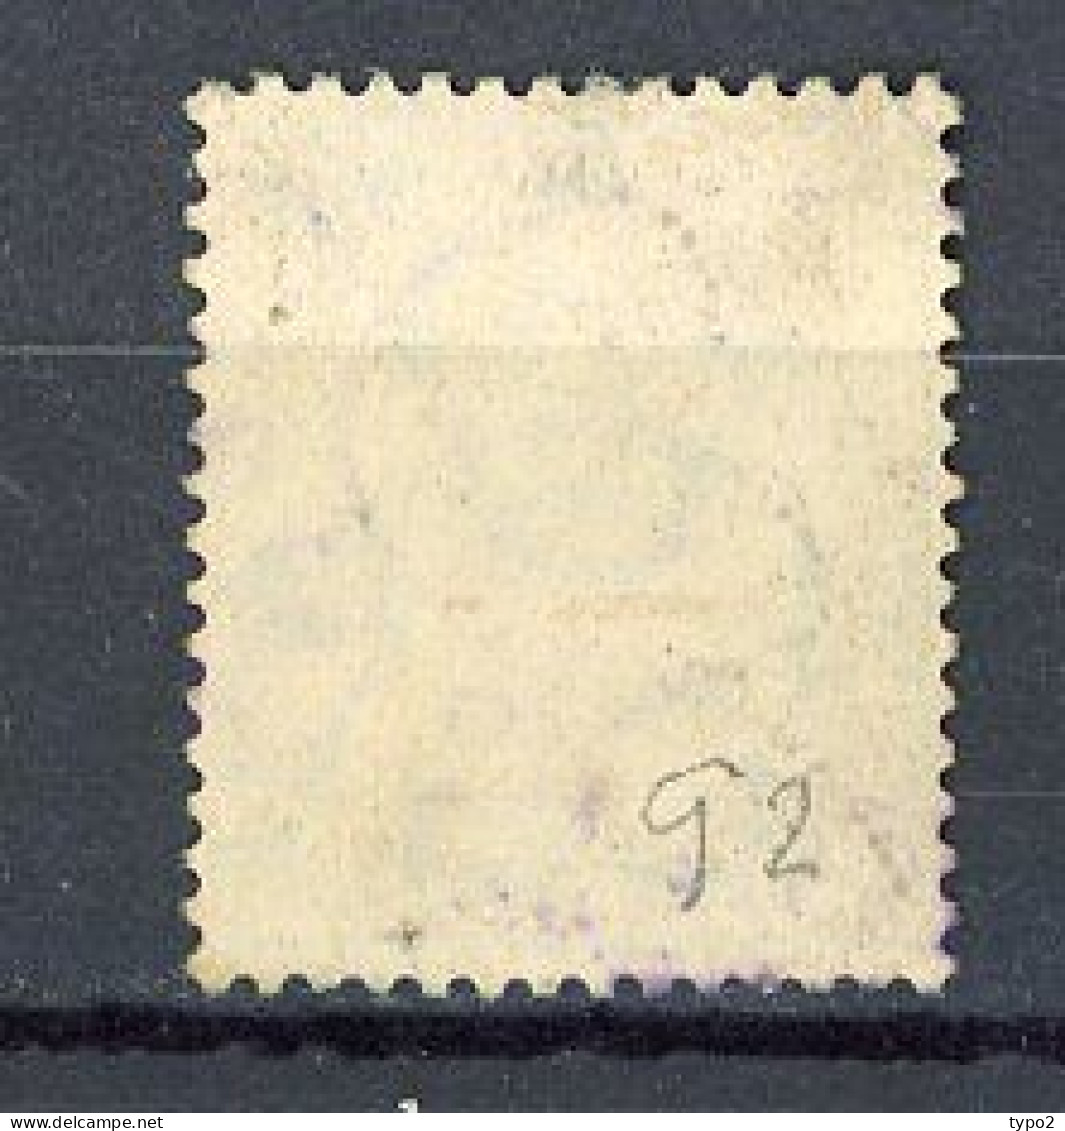 H-K  Yv. N° 92 ; SG N°88 Fil CA Mult (o) 3d Bleu Et Gris Edouard VII Cote 200 Euro BE  2 Scans - Used Stamps